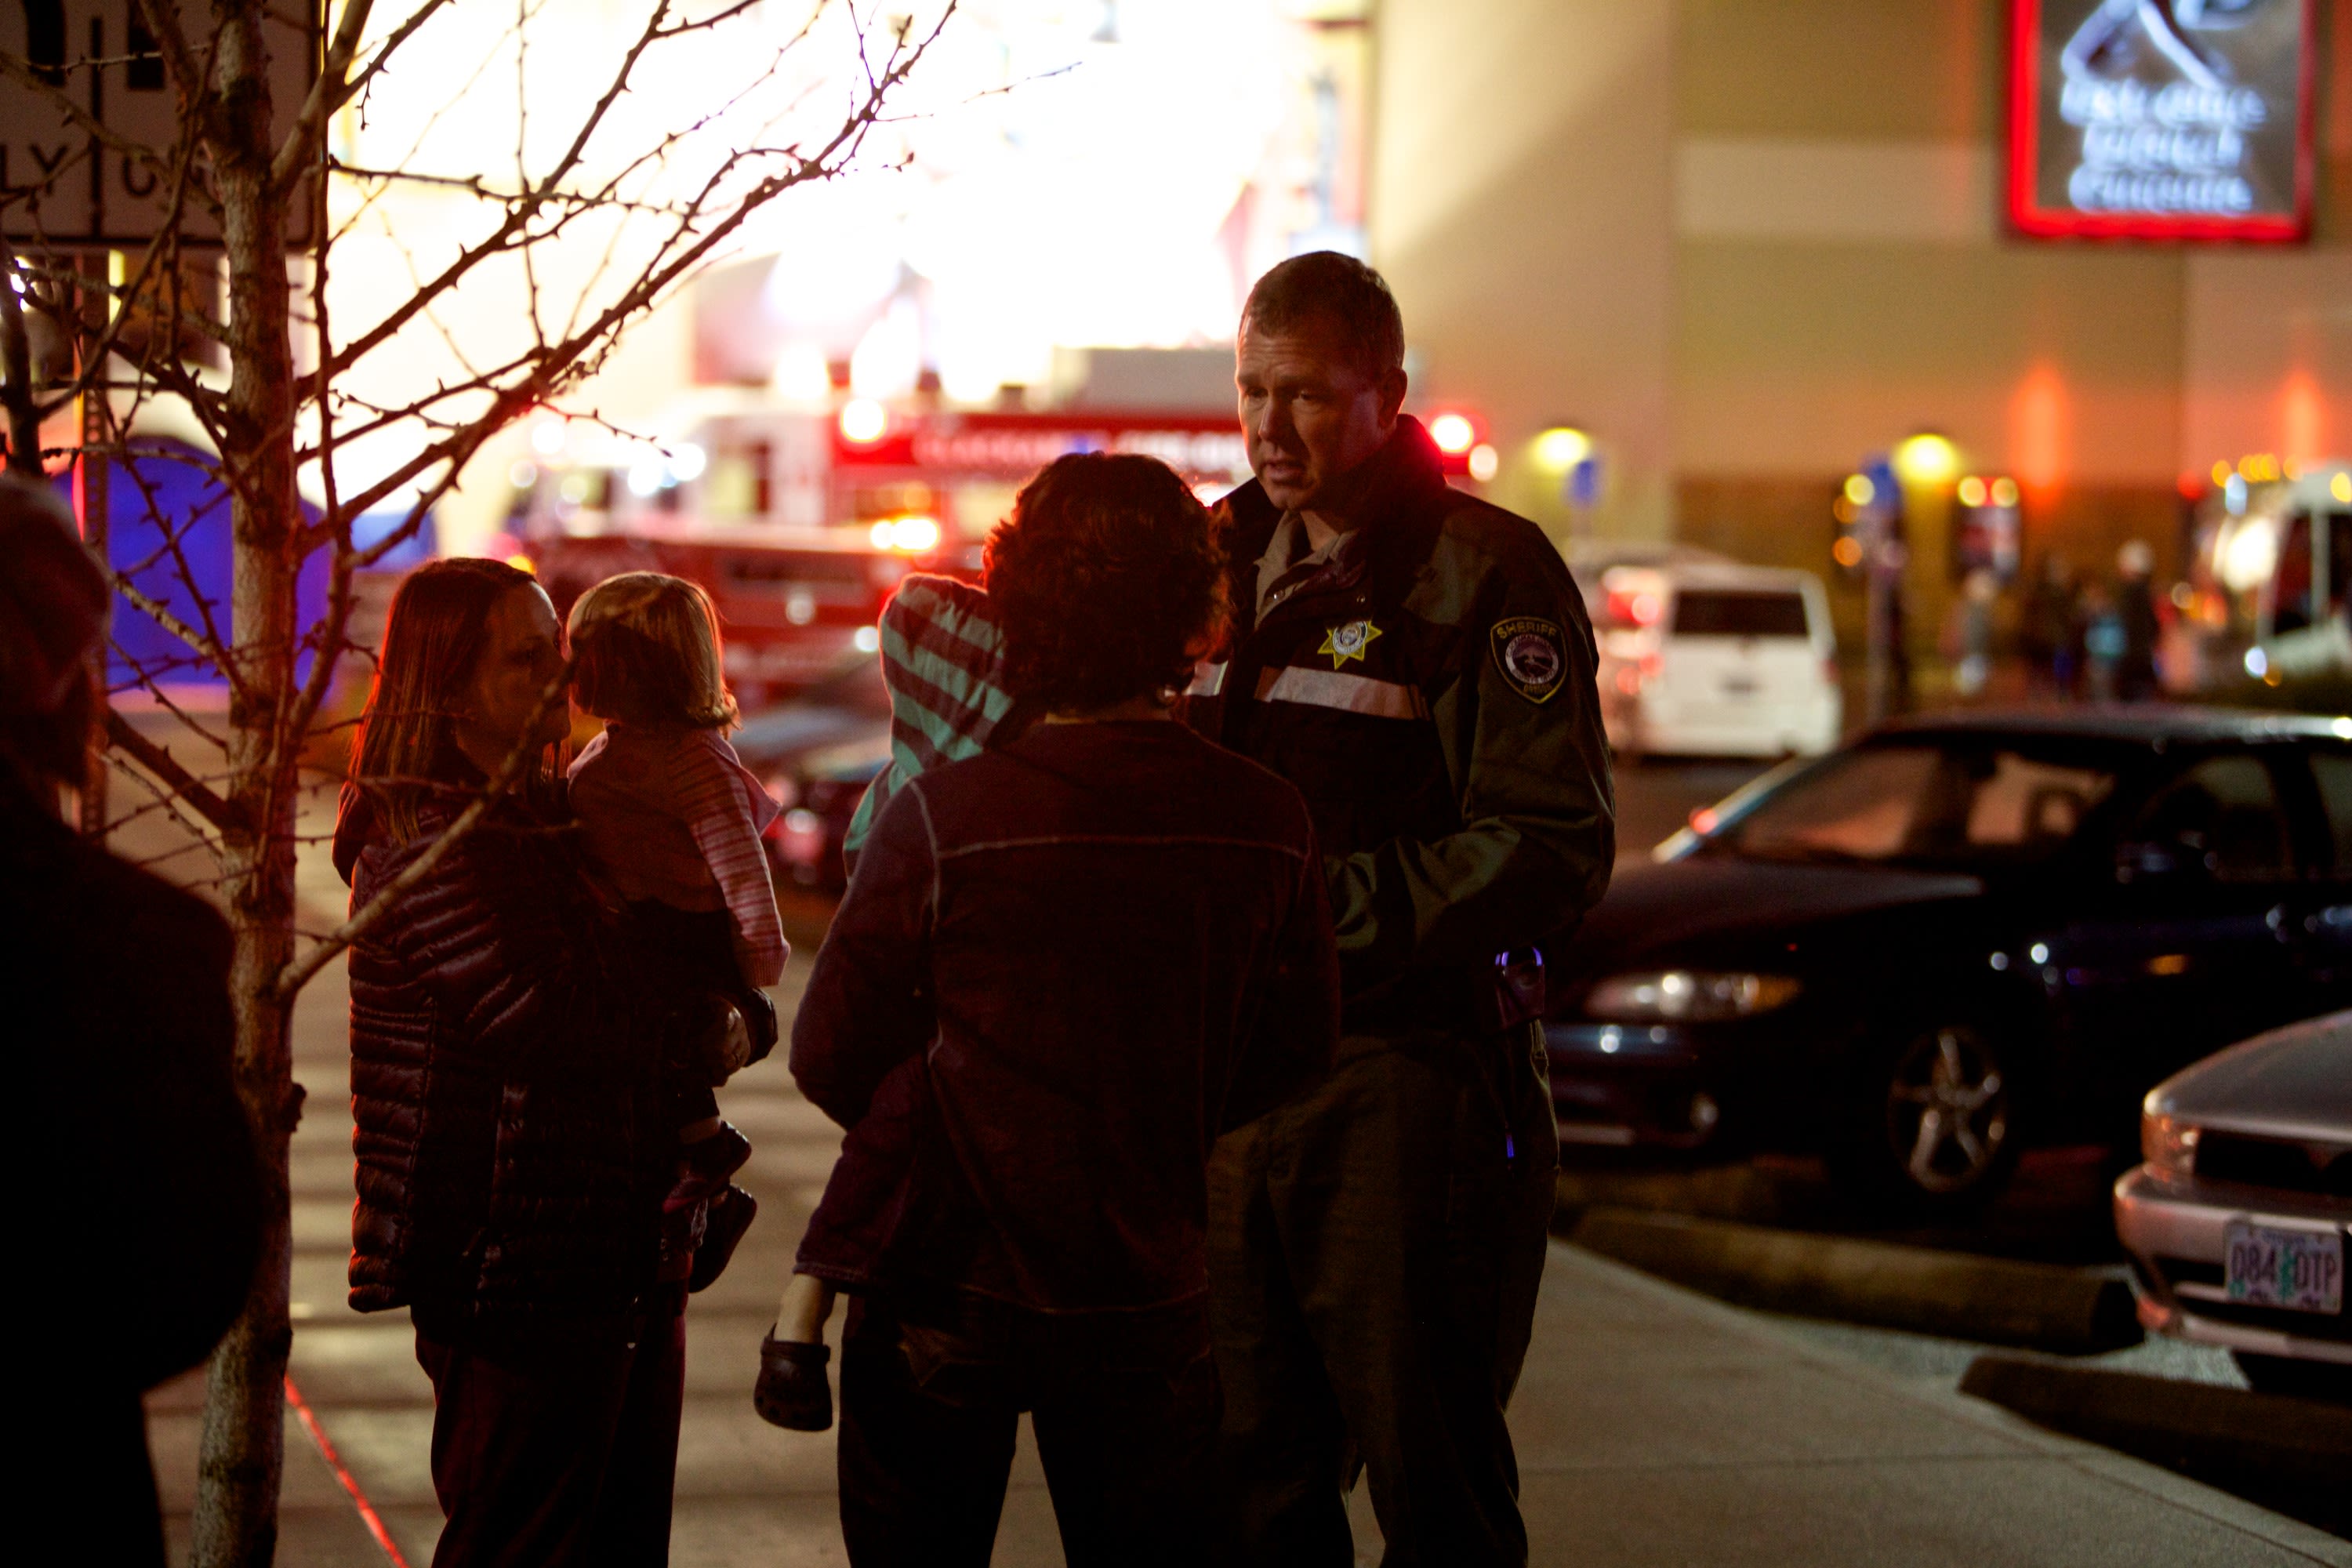 Shooting rampage at Clackamas mall leaves 3 dead, including